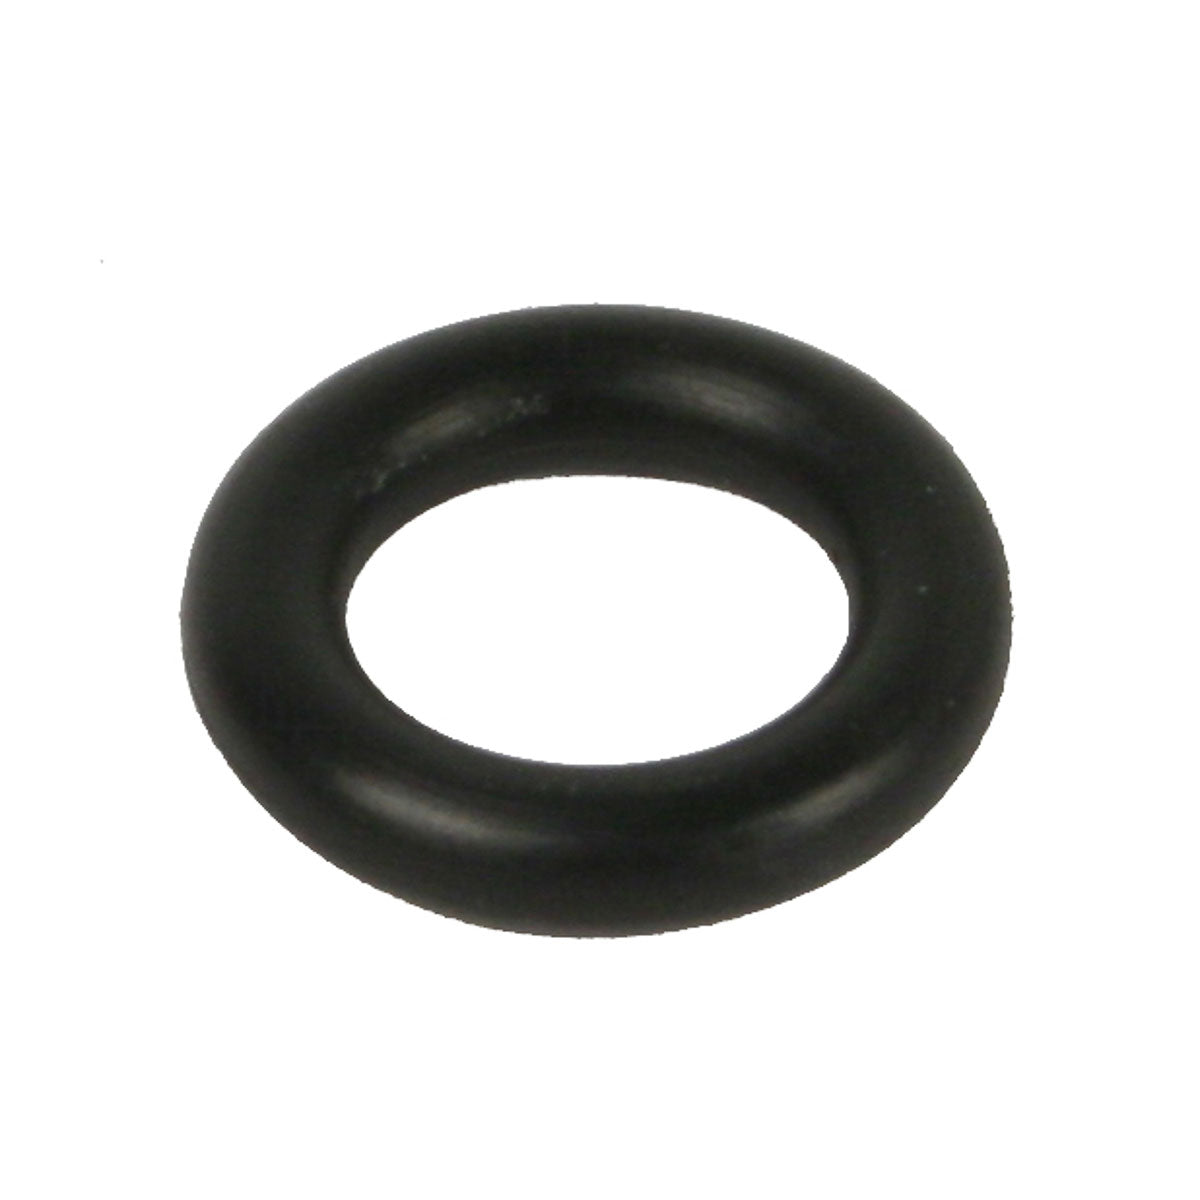 Kartech Fuel Tank O Ring For Bottom Feed Tank Fitting